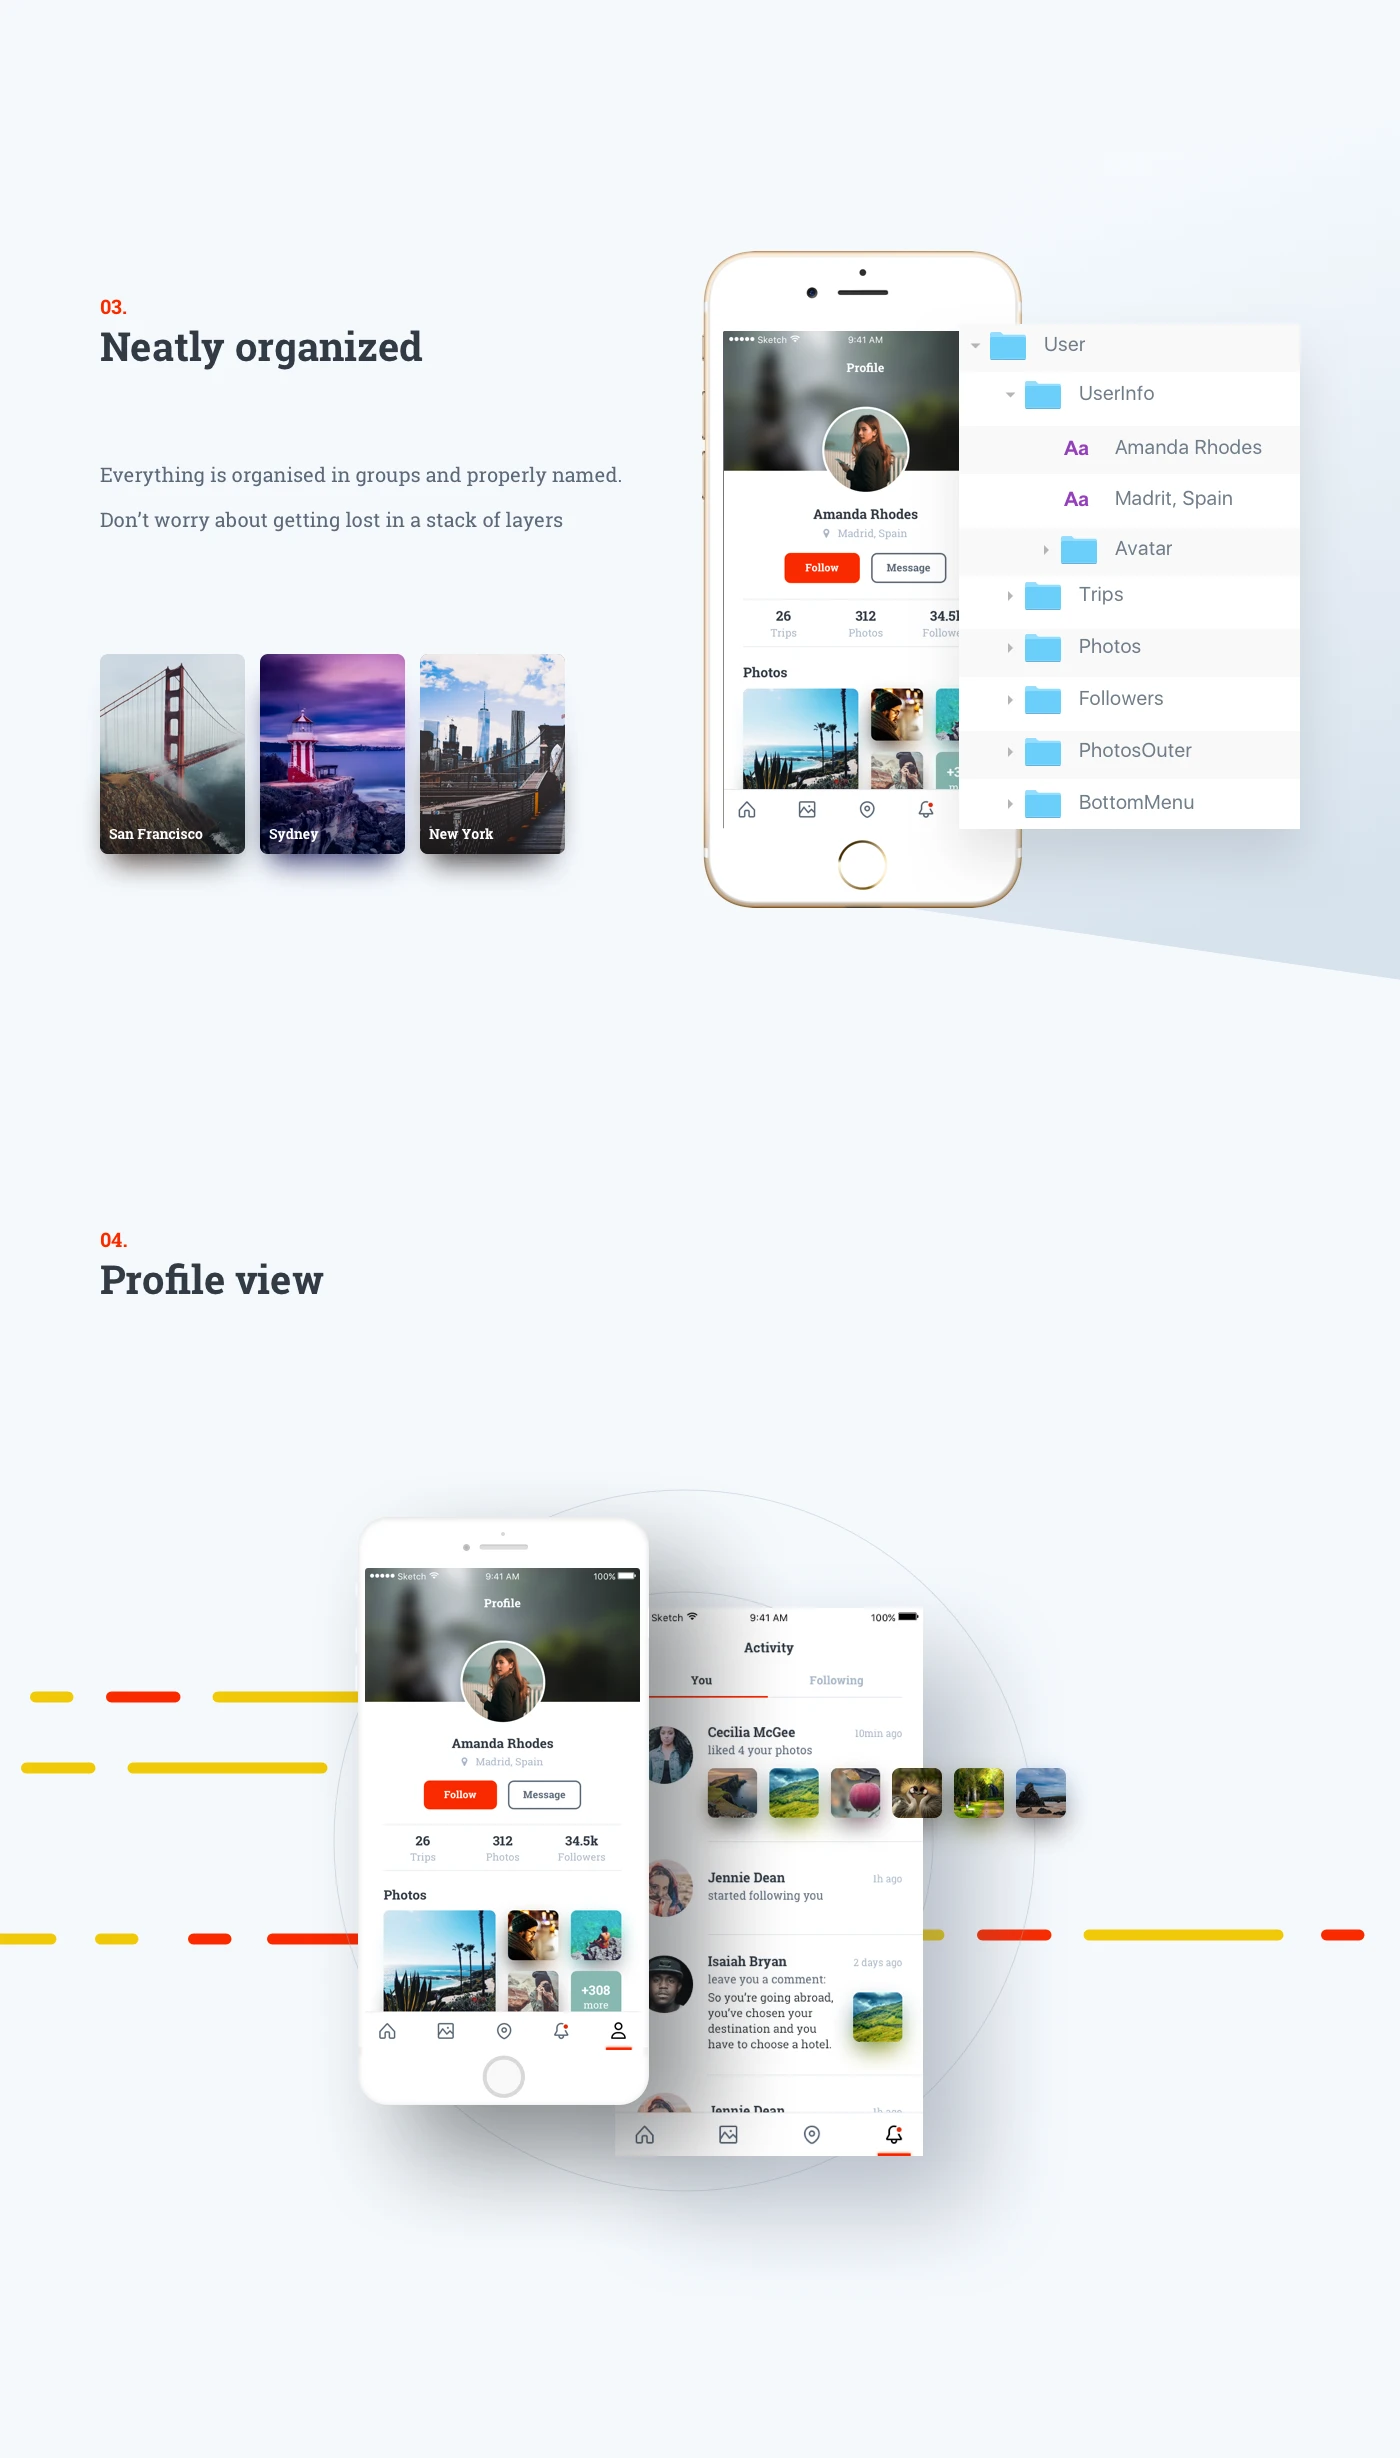 Free Travel App Ui Kit - There are 15+ carefully designed mobile screens by 7ninjas